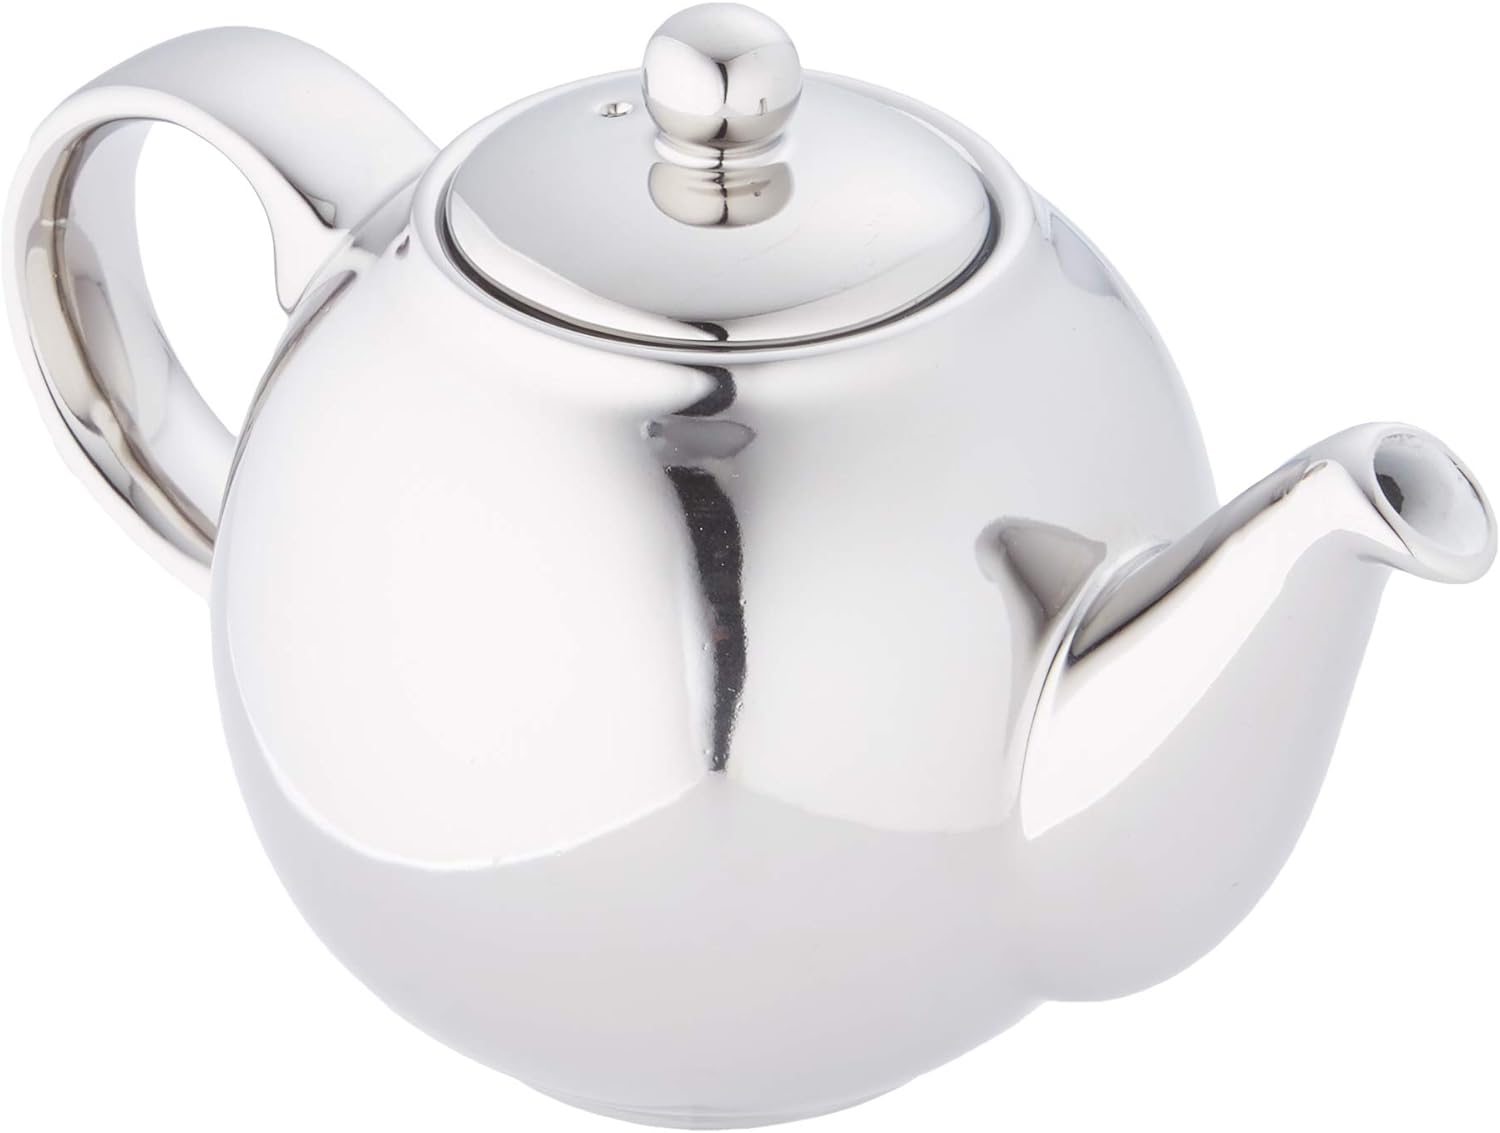 London Pottery Globe Ceramic Teapot with Strainer, Metallic Silver, 2 Cup Capacity (500ml)